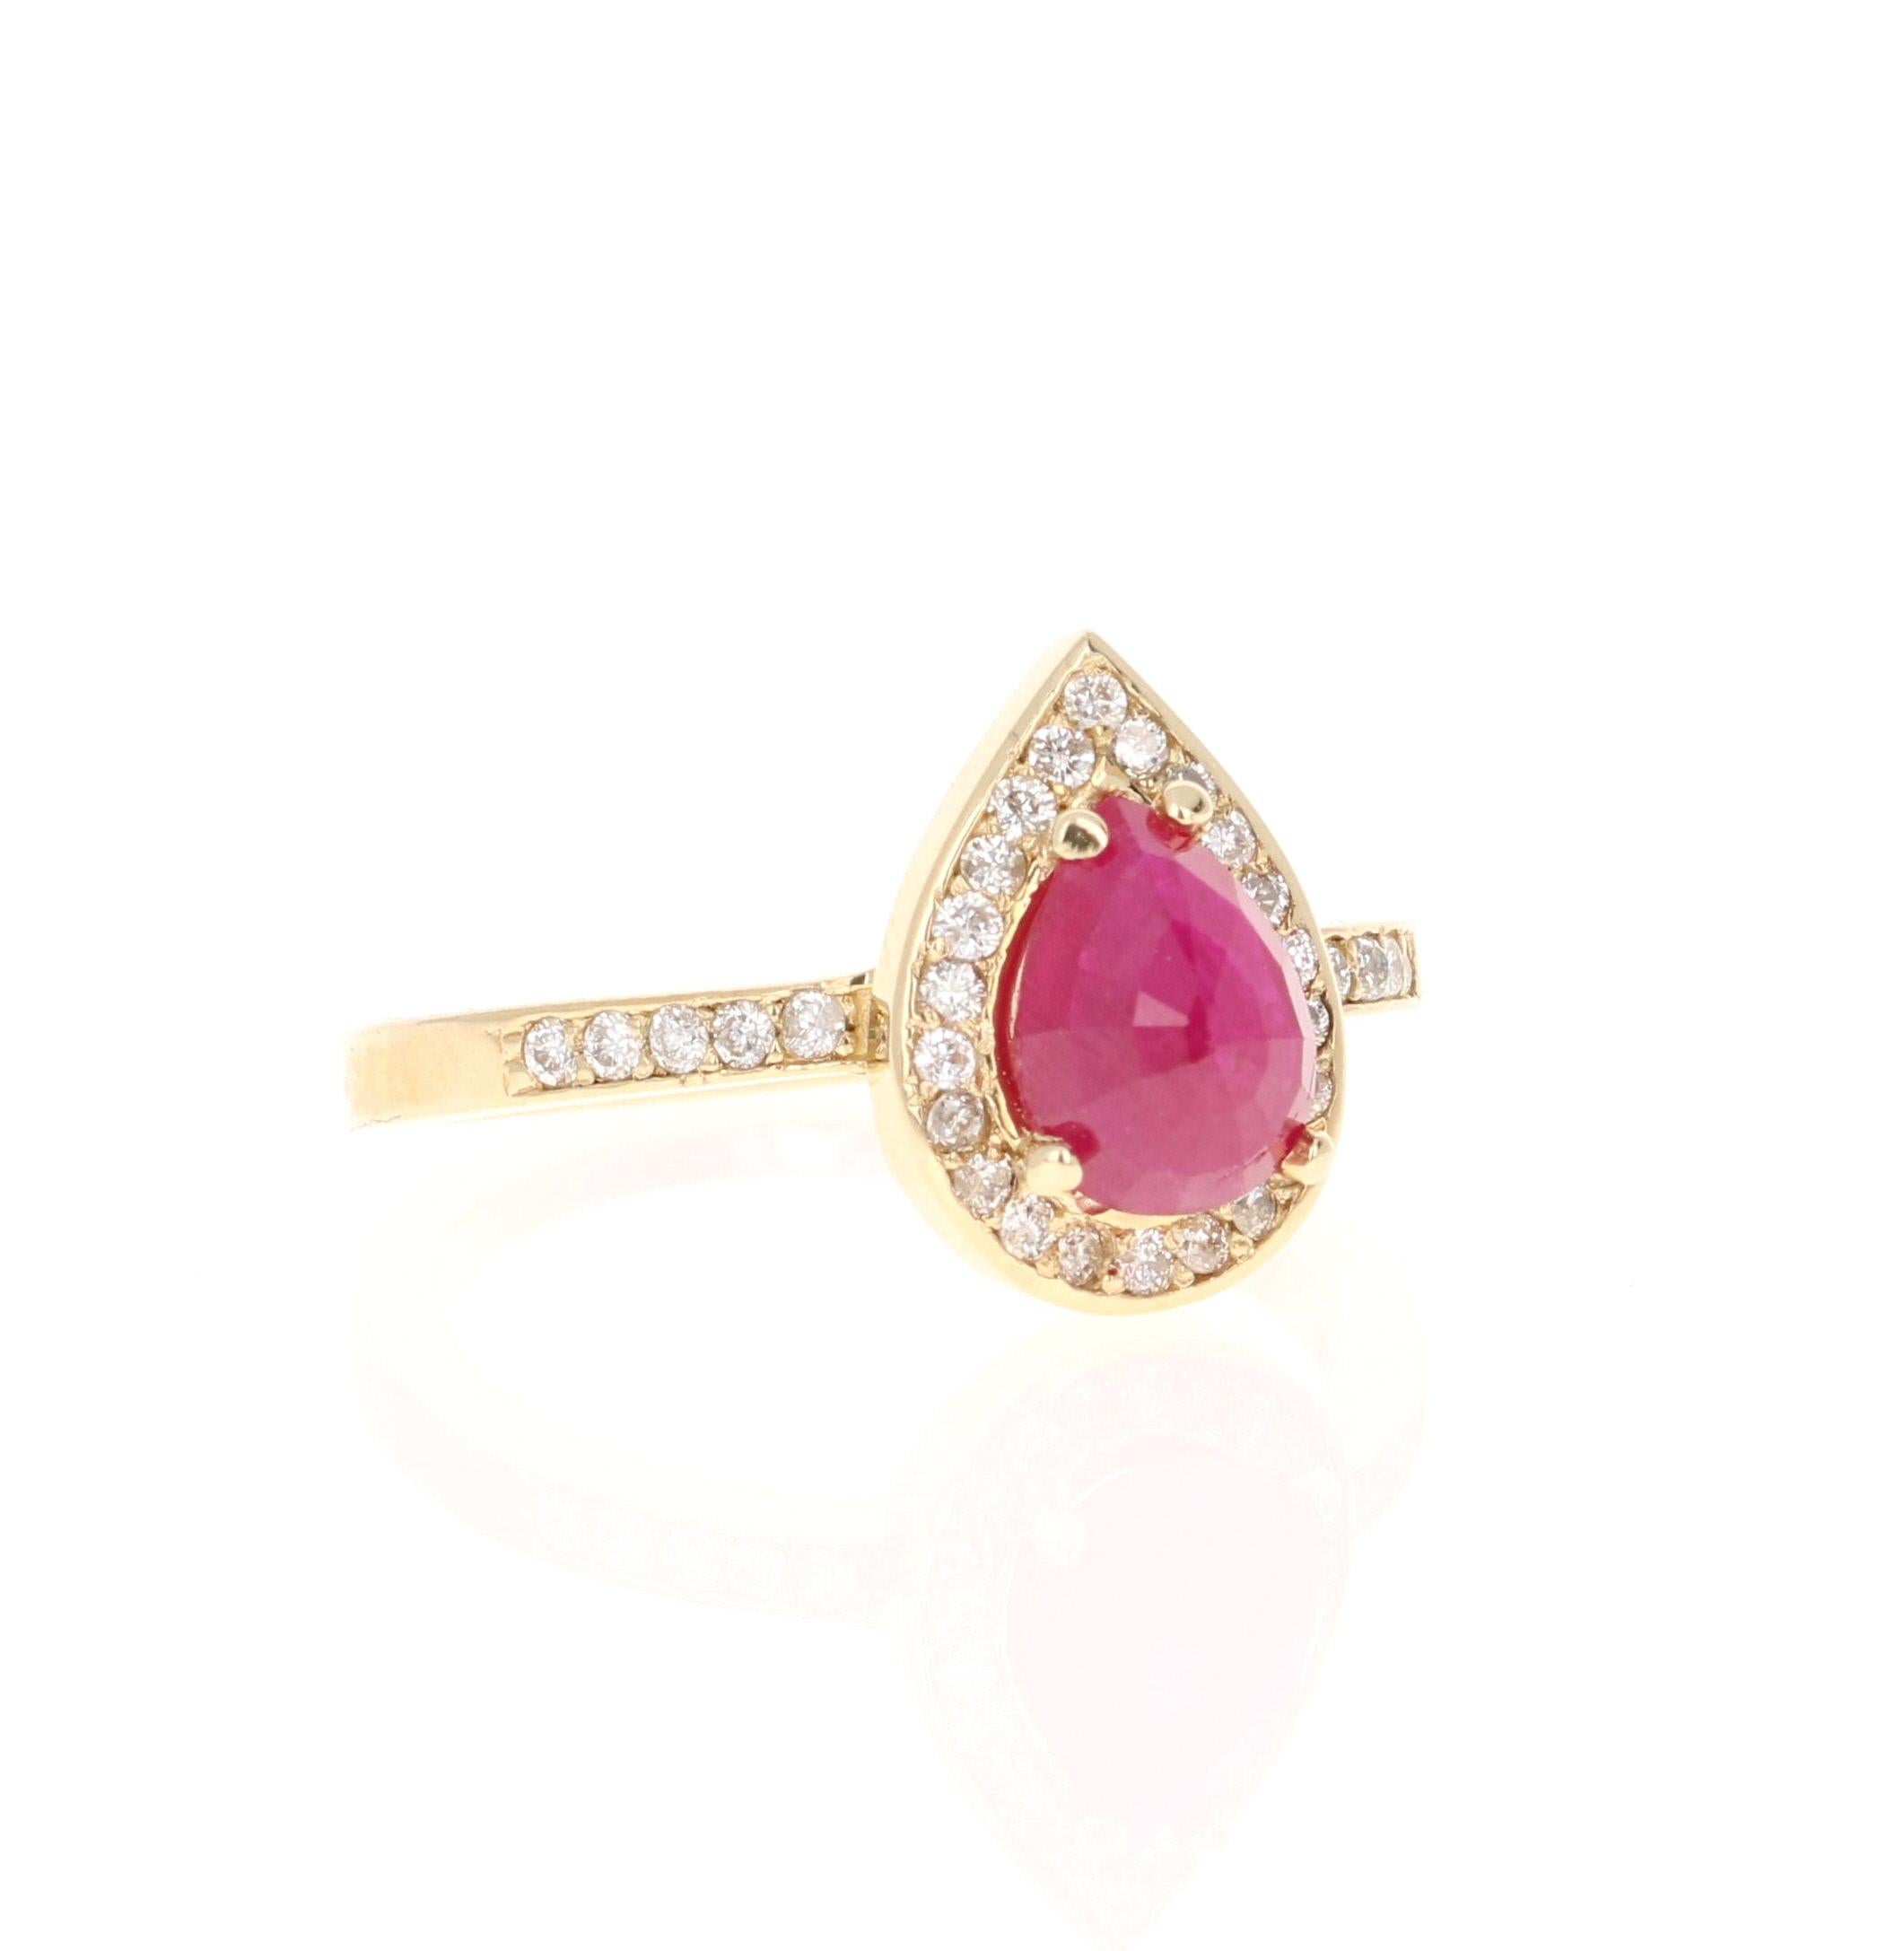 This ring has a pretty pear cut Ruby that weighs 1.39 carats and has 32 round cut diamonds that weigh 0.31 carats, (clarity: SI, color: F) The Pear Cut Ruby is natural but heated as per industry standards and measures at approximately 8 mm x 6